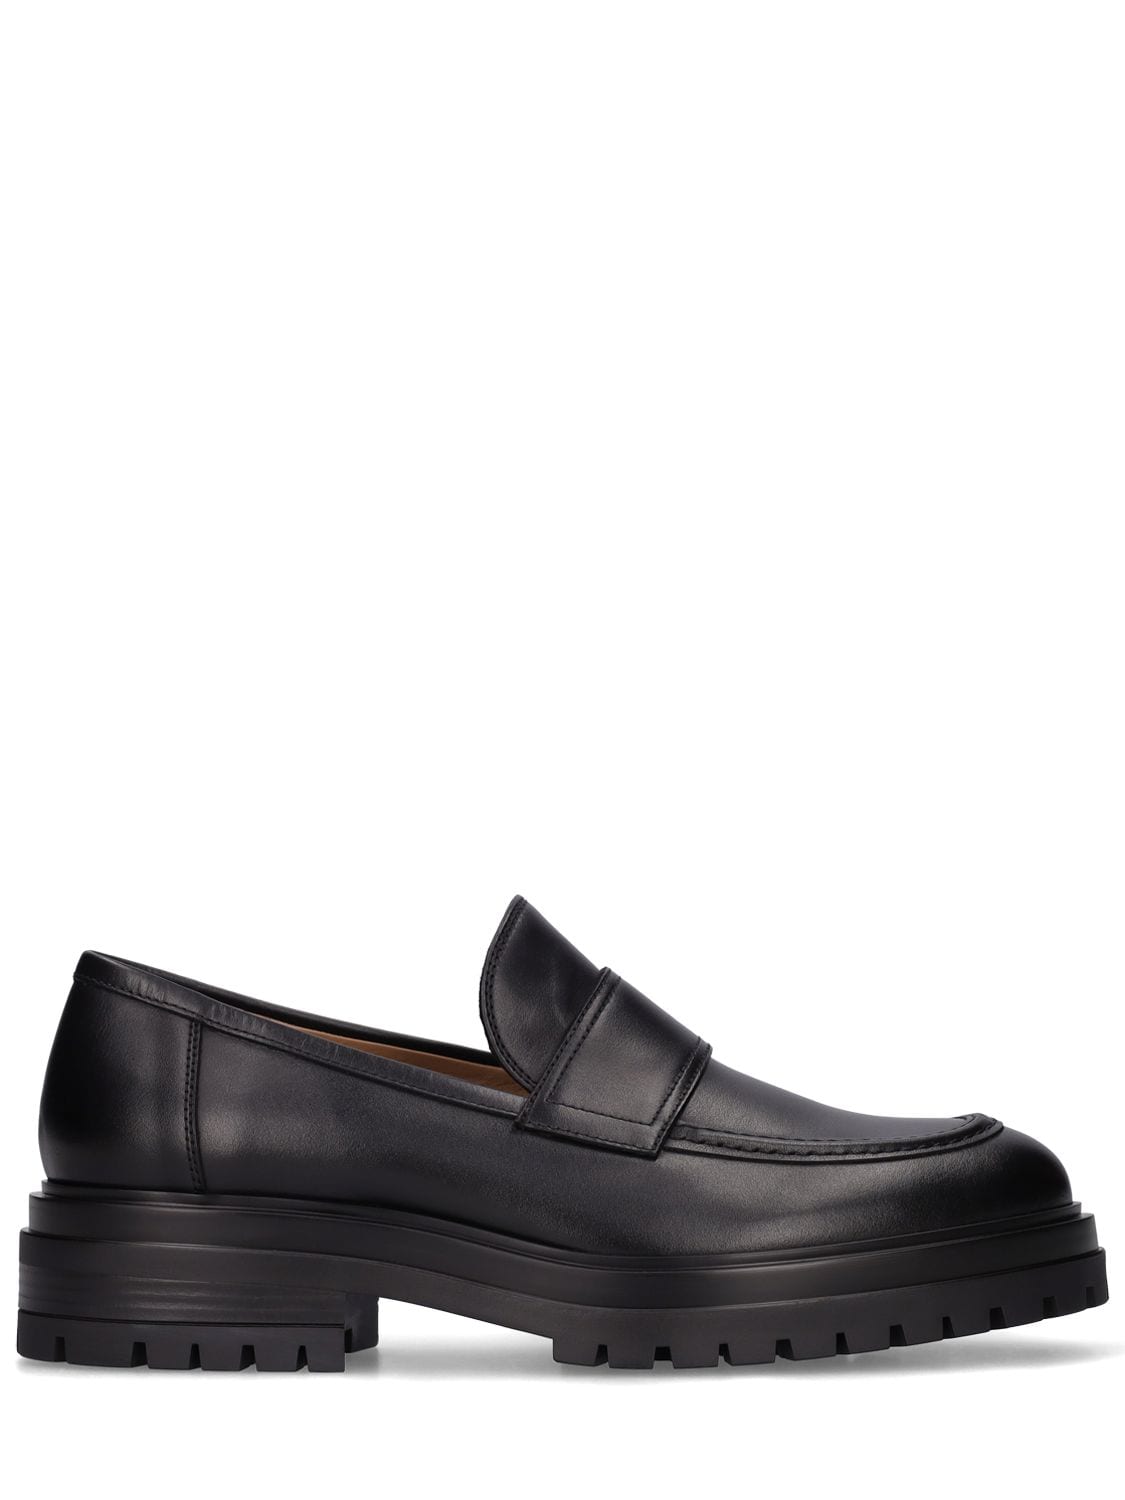 GIANVITO ROSSI PAUL LEATHER LOAFERS